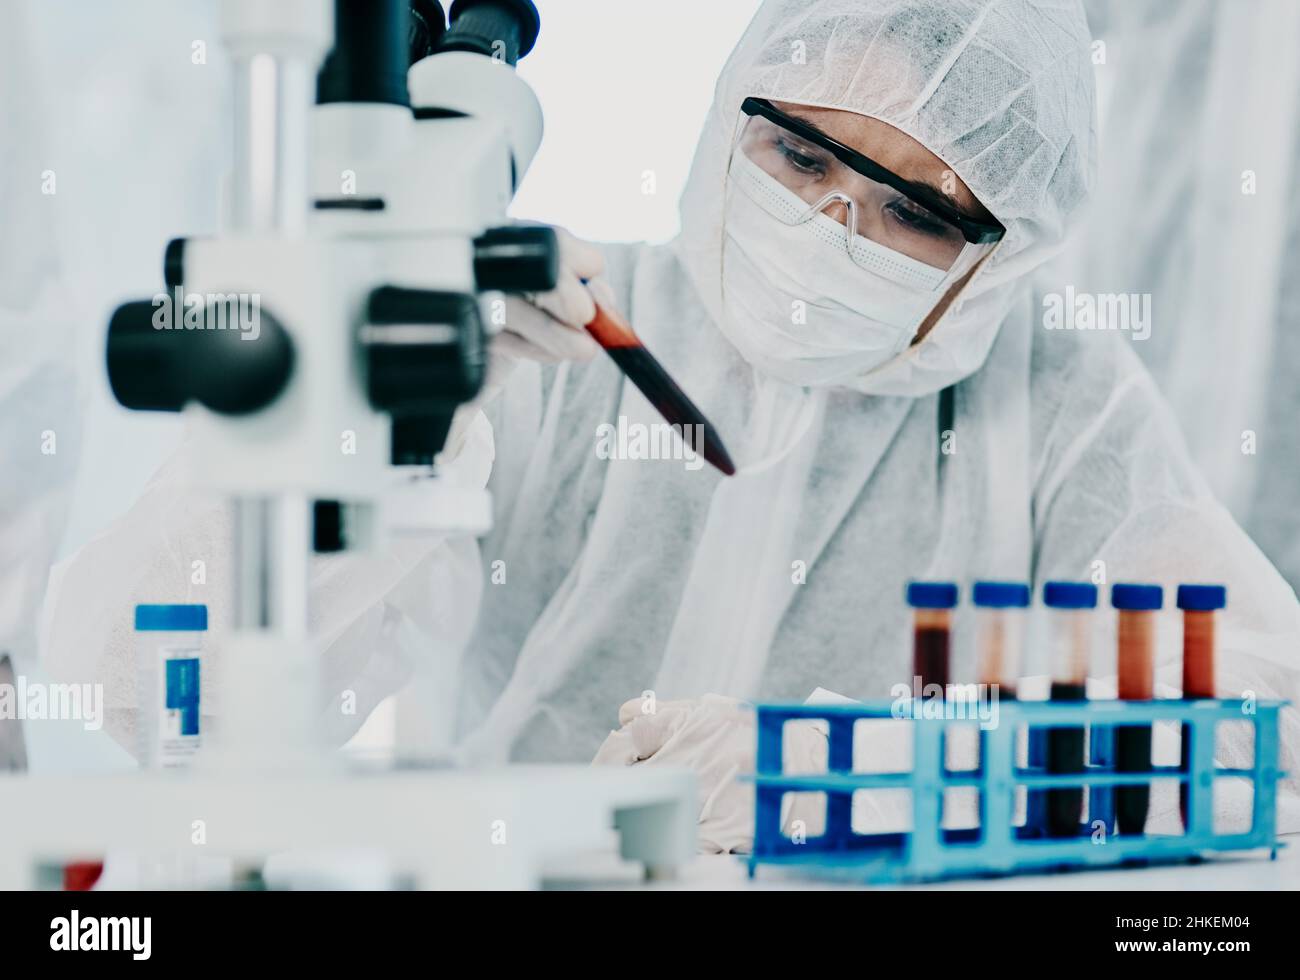 The answers are in the details. Shot of a scientist in hazmat suit conducting medical research in a laboratory. Stock Photo